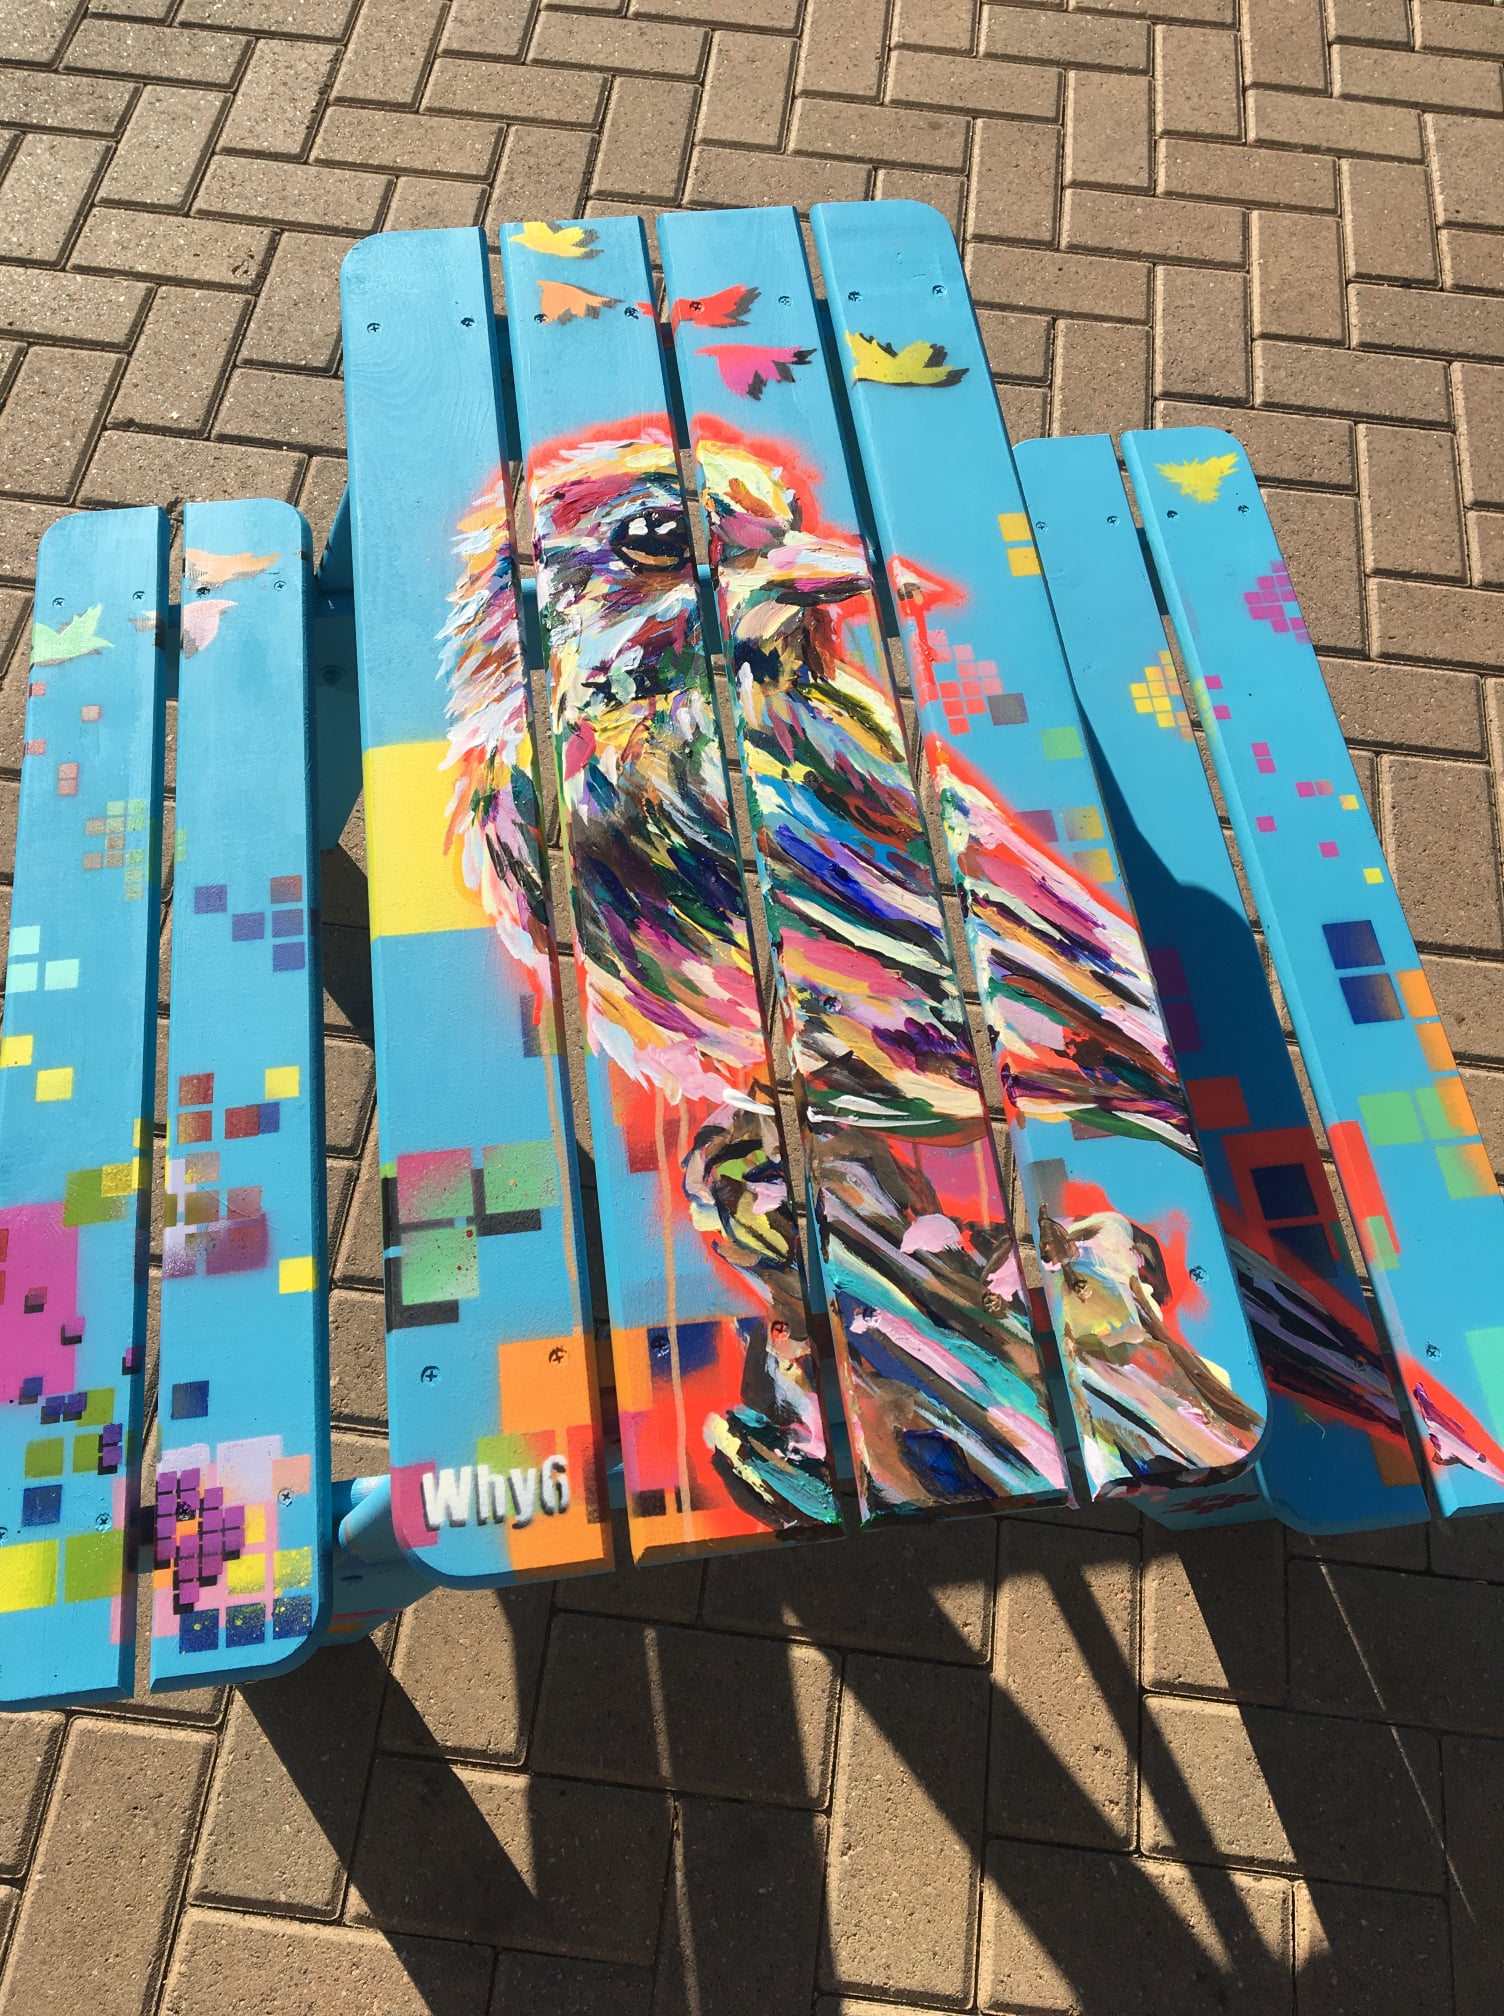 Painted Adirondack picnic table depicting a colorful bird with digital boxes in the background